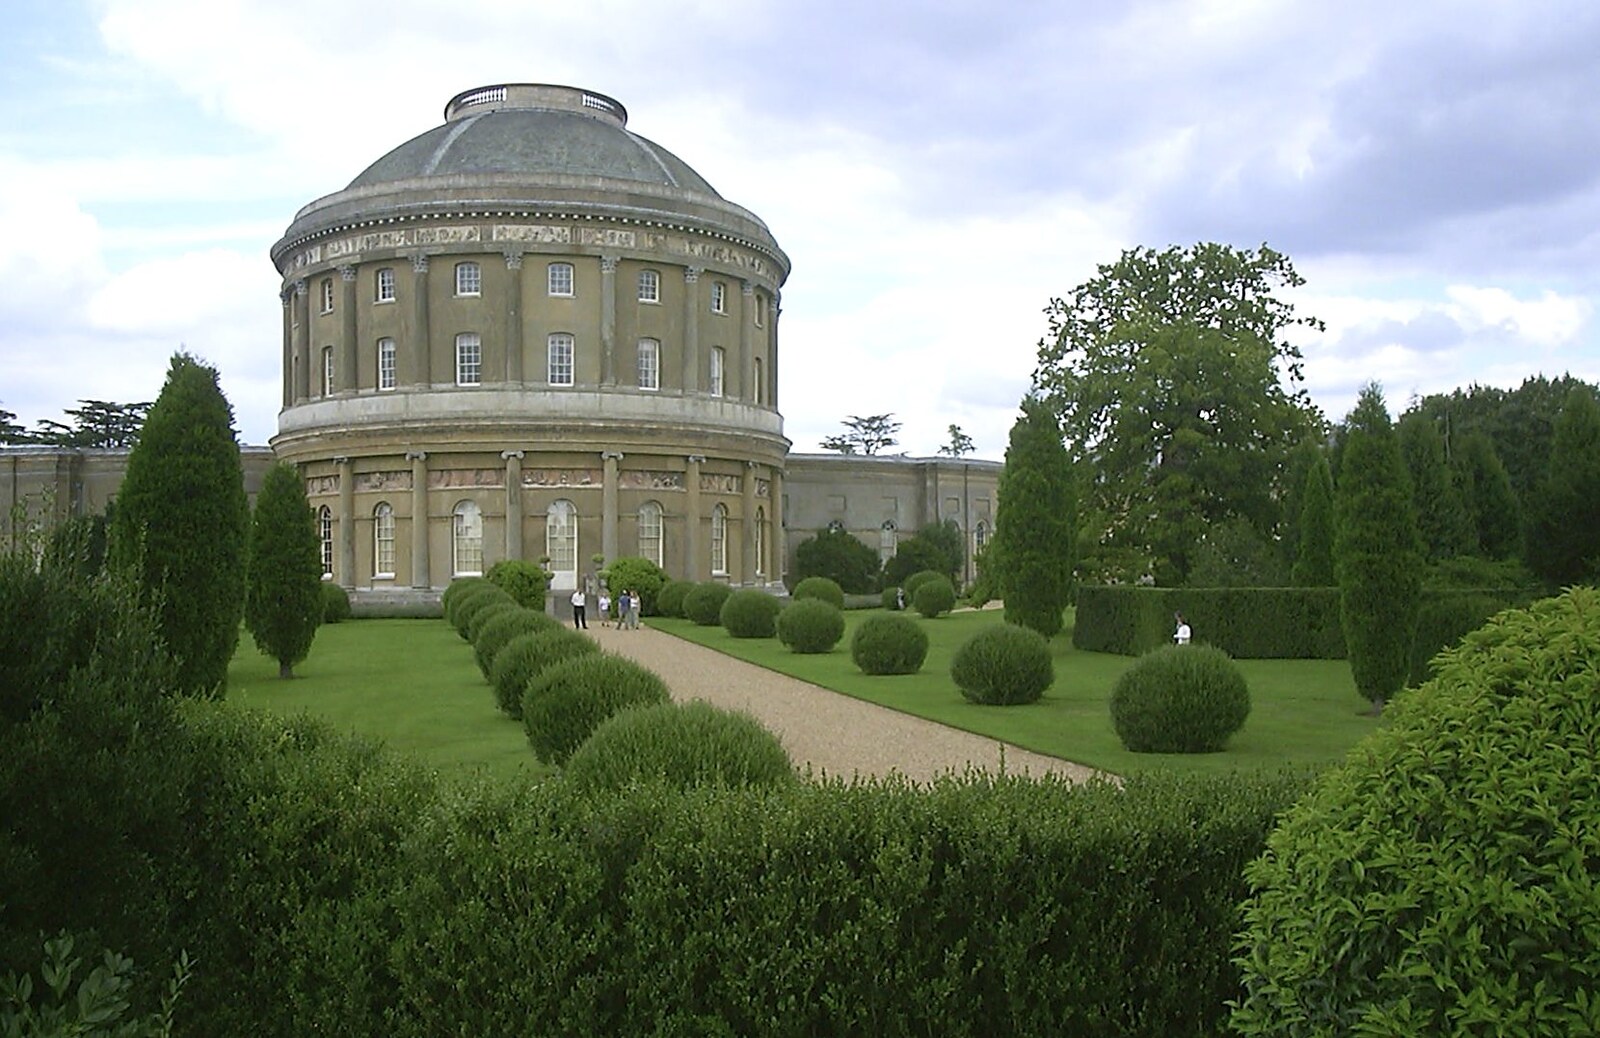 The rotunda from A Trip to Ickworth House, Horringer, Suffolk - 22nd August 2004